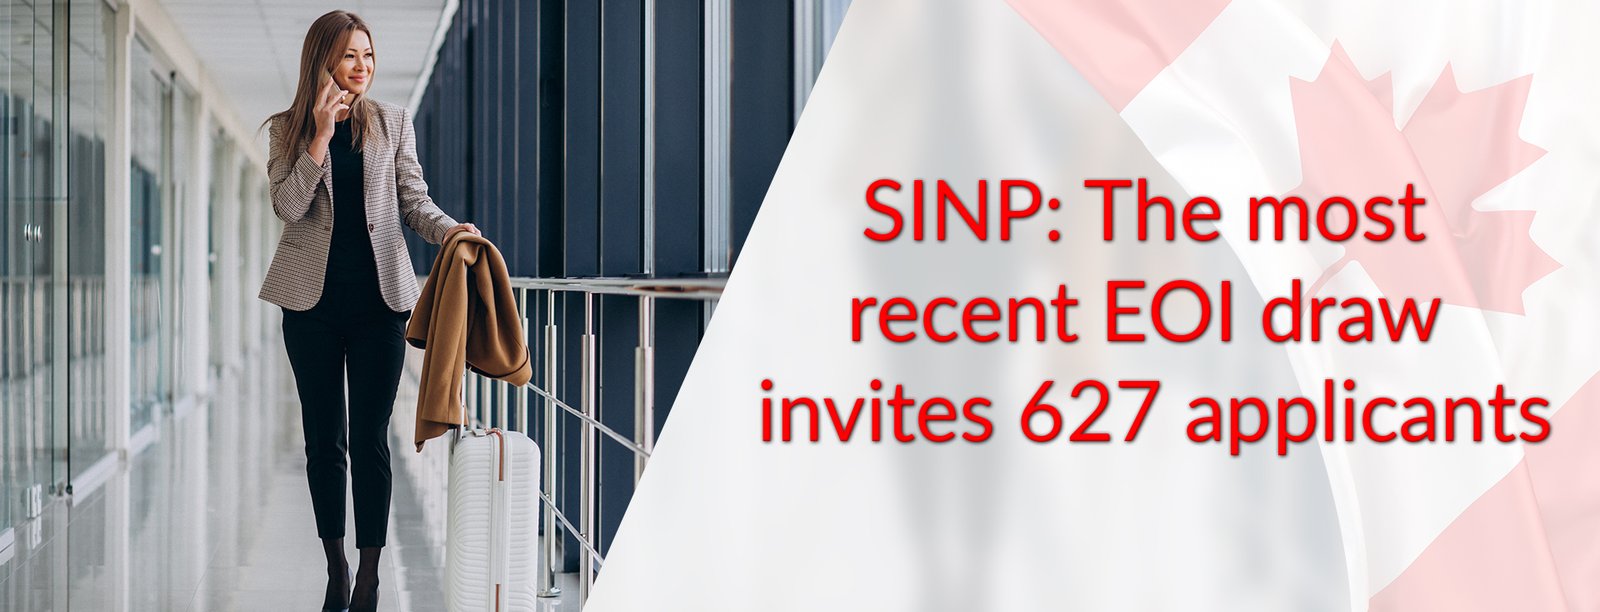 SINP The most recent EOI draw invites 627 applicants